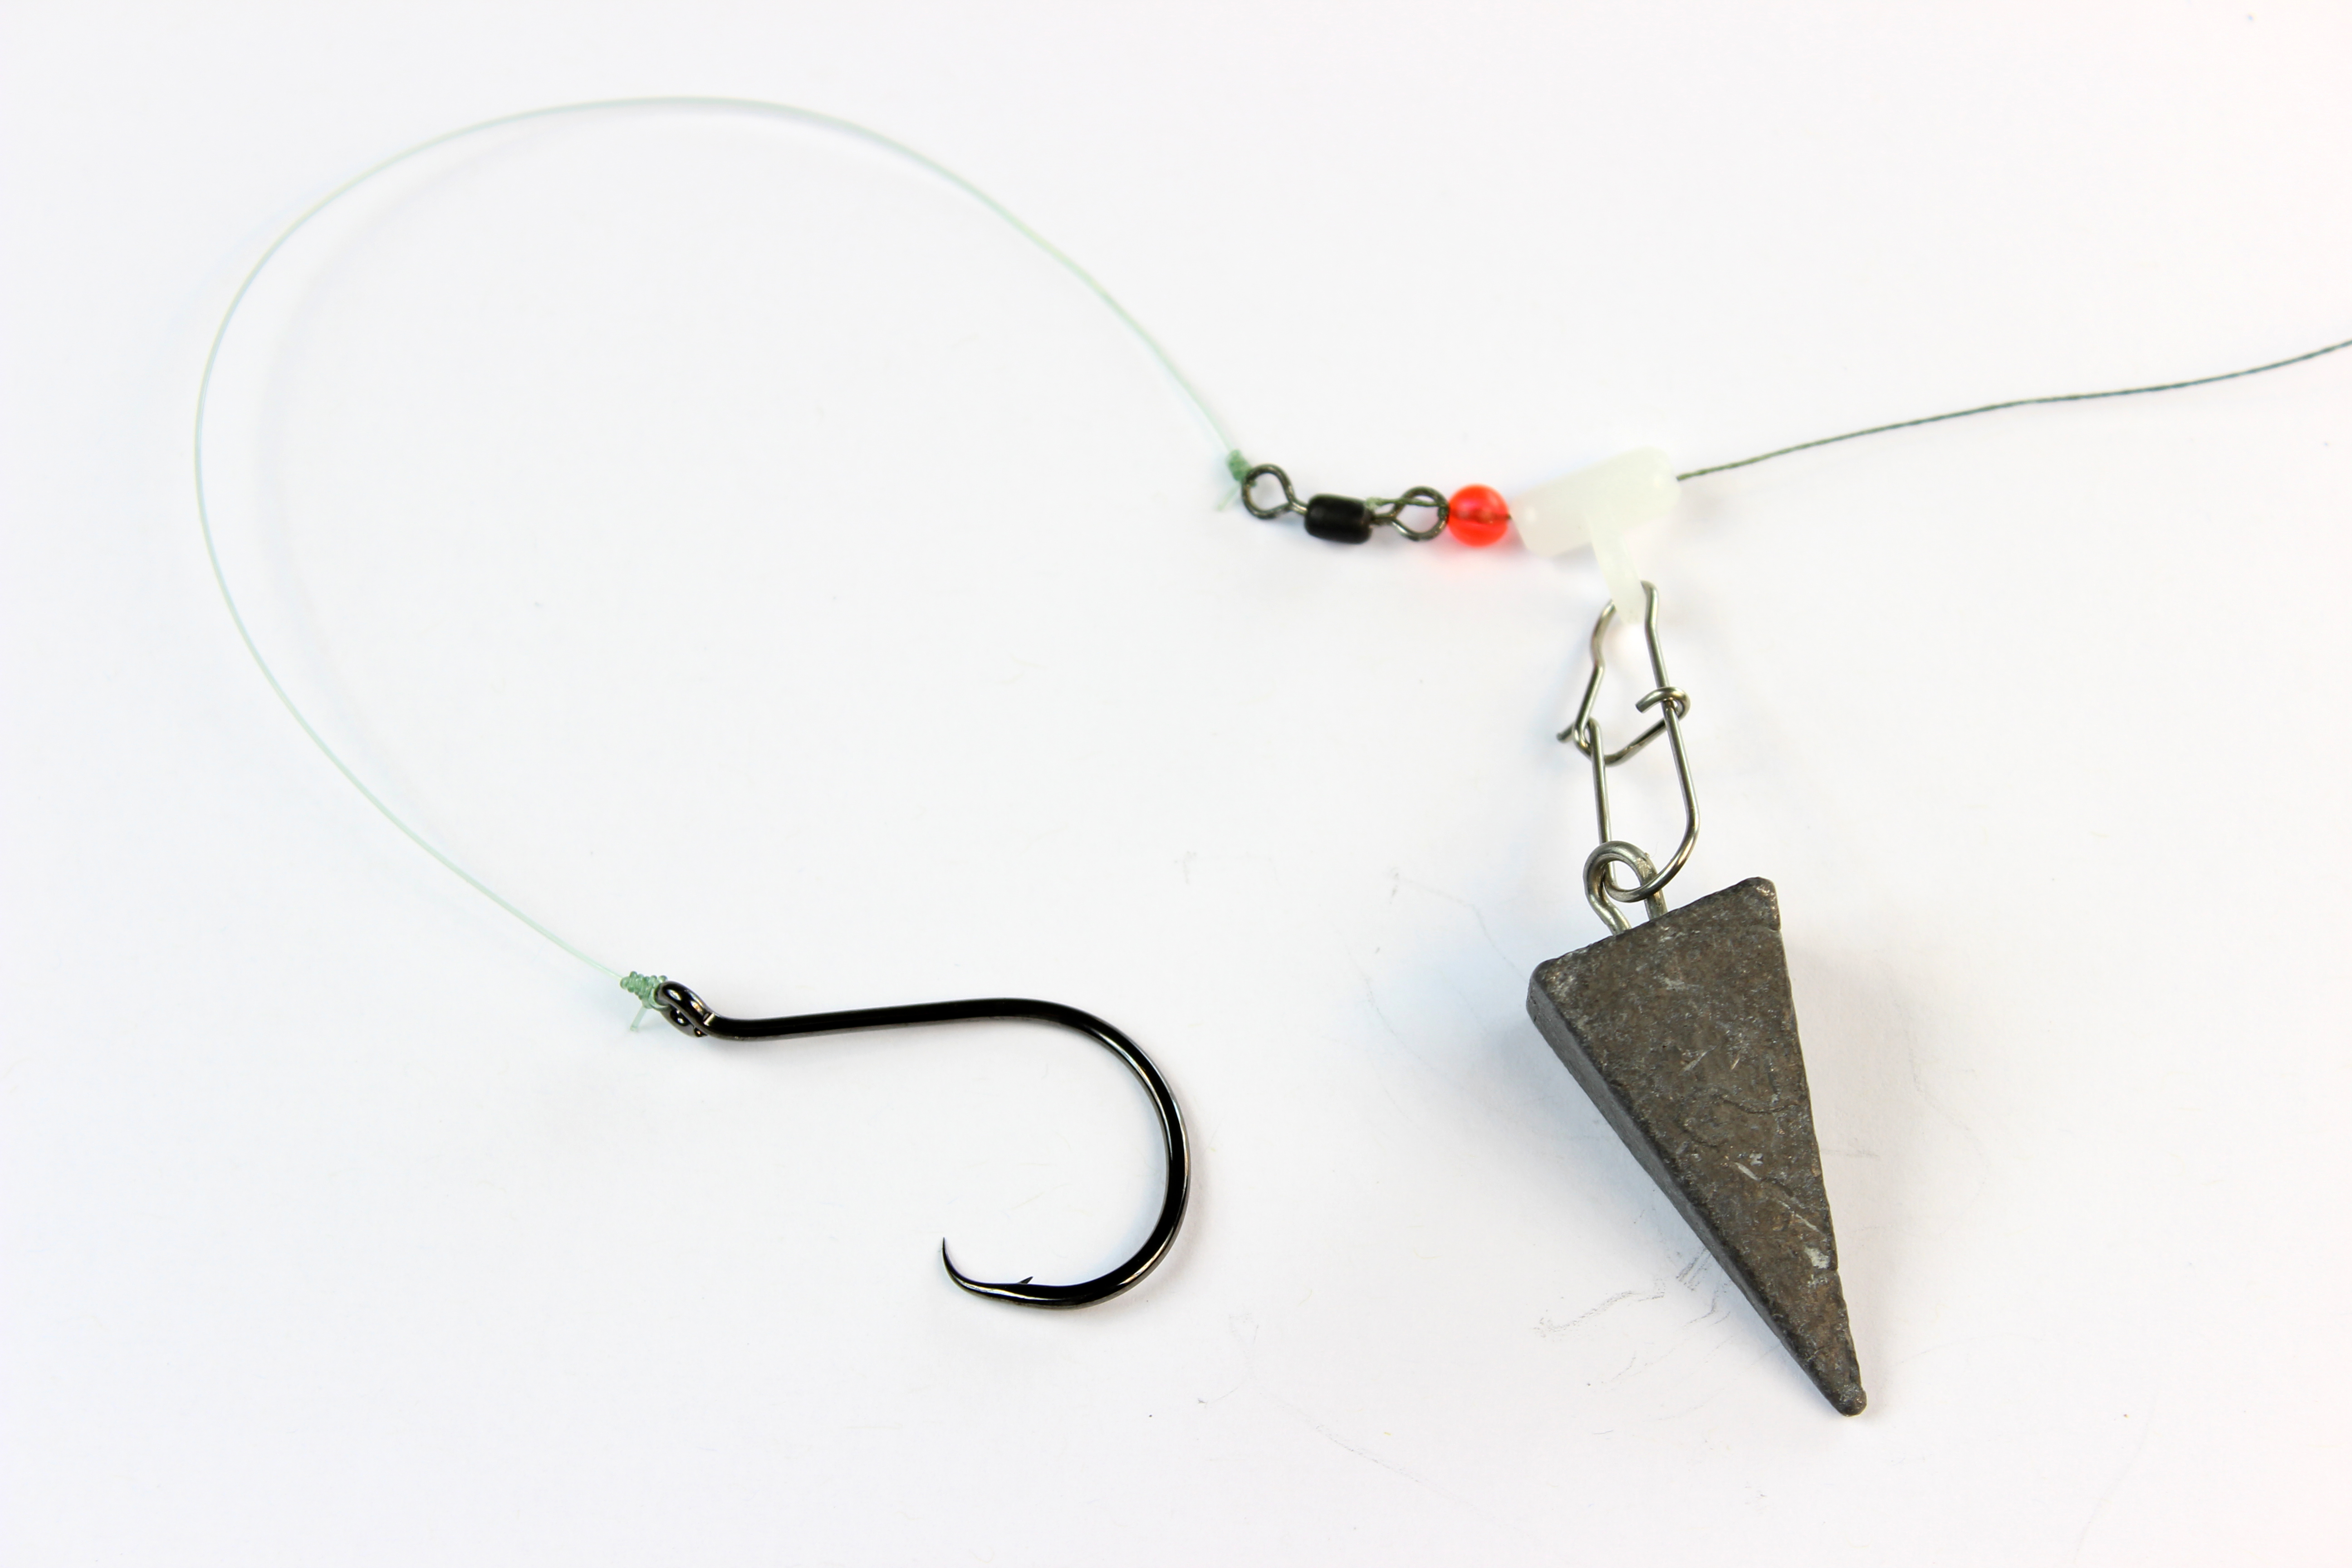 How to make snag-less sinkers for catfishing